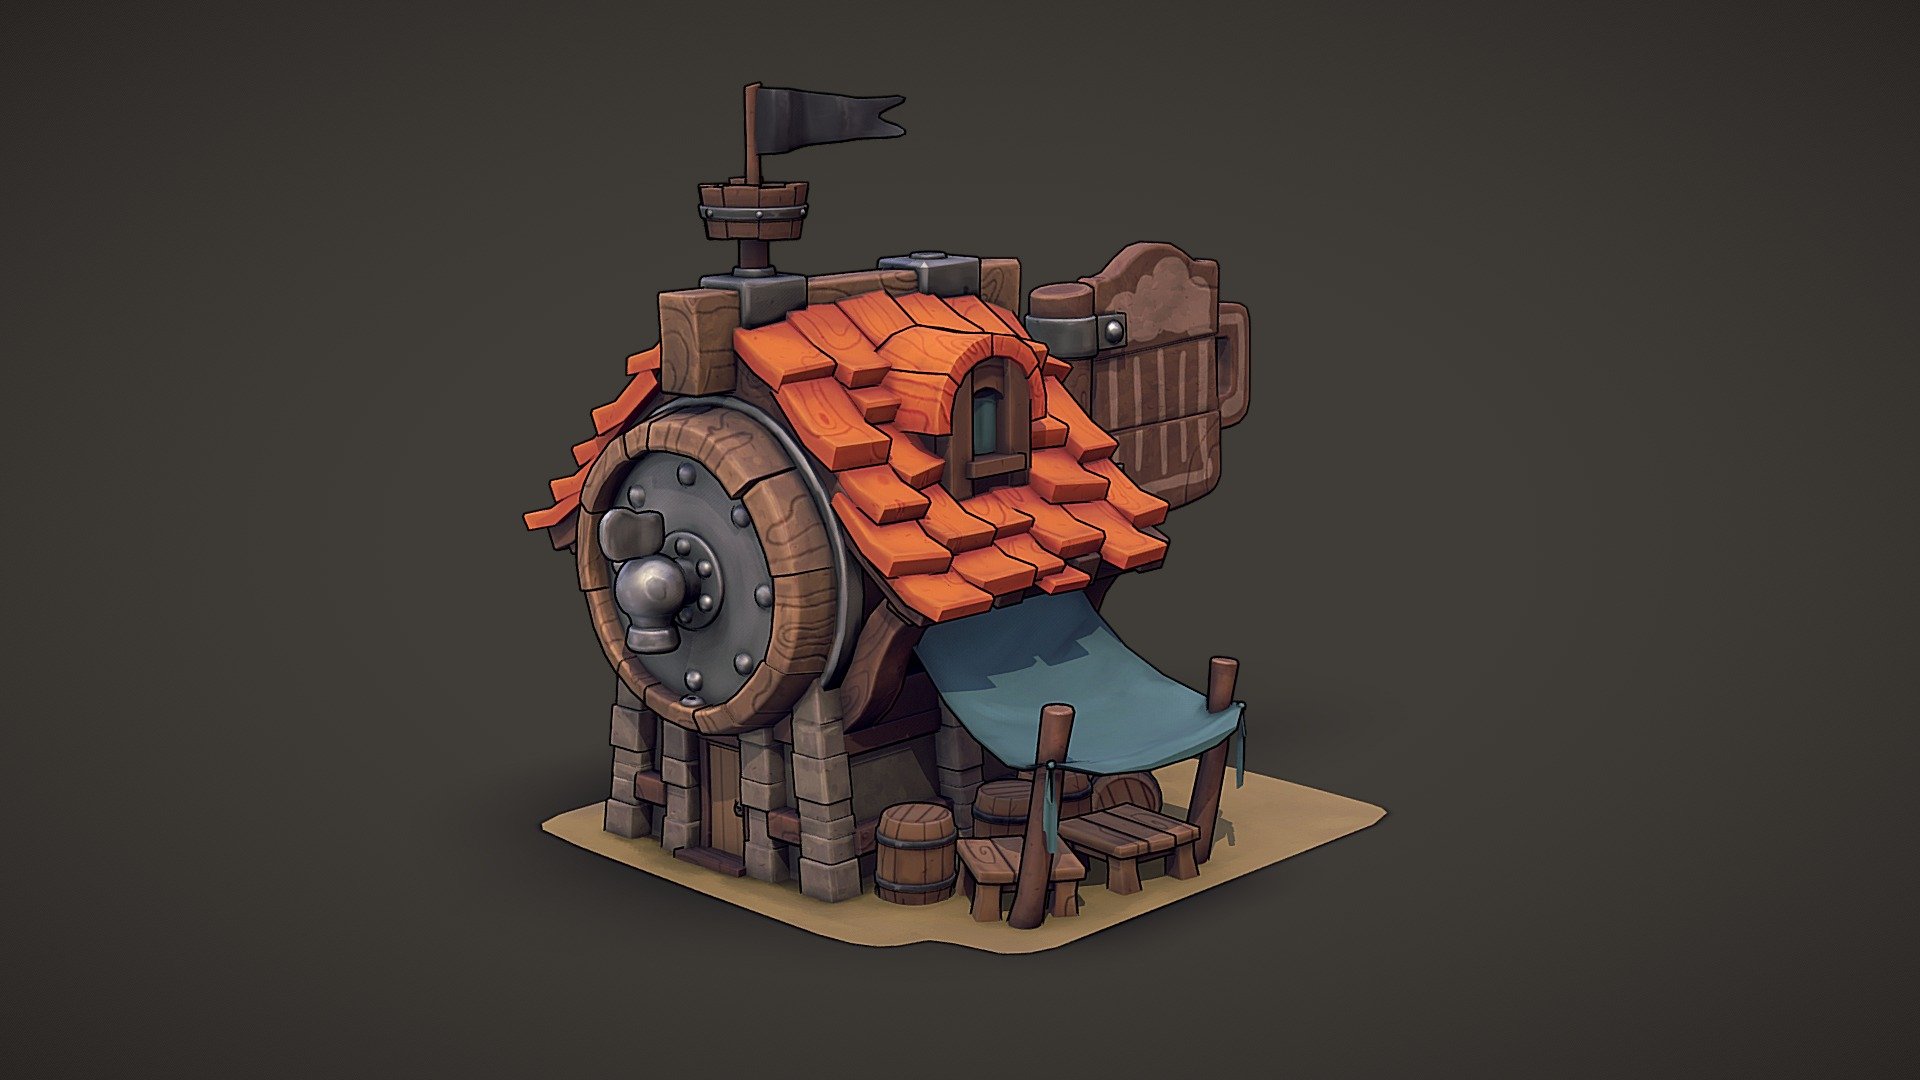 Hiya I bring you a new model. This time its this cute tavern based on a concept by Gabriel Romero. 
I tried a new workflow and even though this piece isn't as optimized as I would like it to be. Working on it gave me valueable insight when working in Substance Painter and making stylized PBR props. 

It is based on a design made byGabriel Romero (Gaboleps)

He makes some great work go check him out &gt; https://www.artstation.com/gaboleps
 - The Big Barrel Pub - 3D model by AntijnvanderGun 3d model